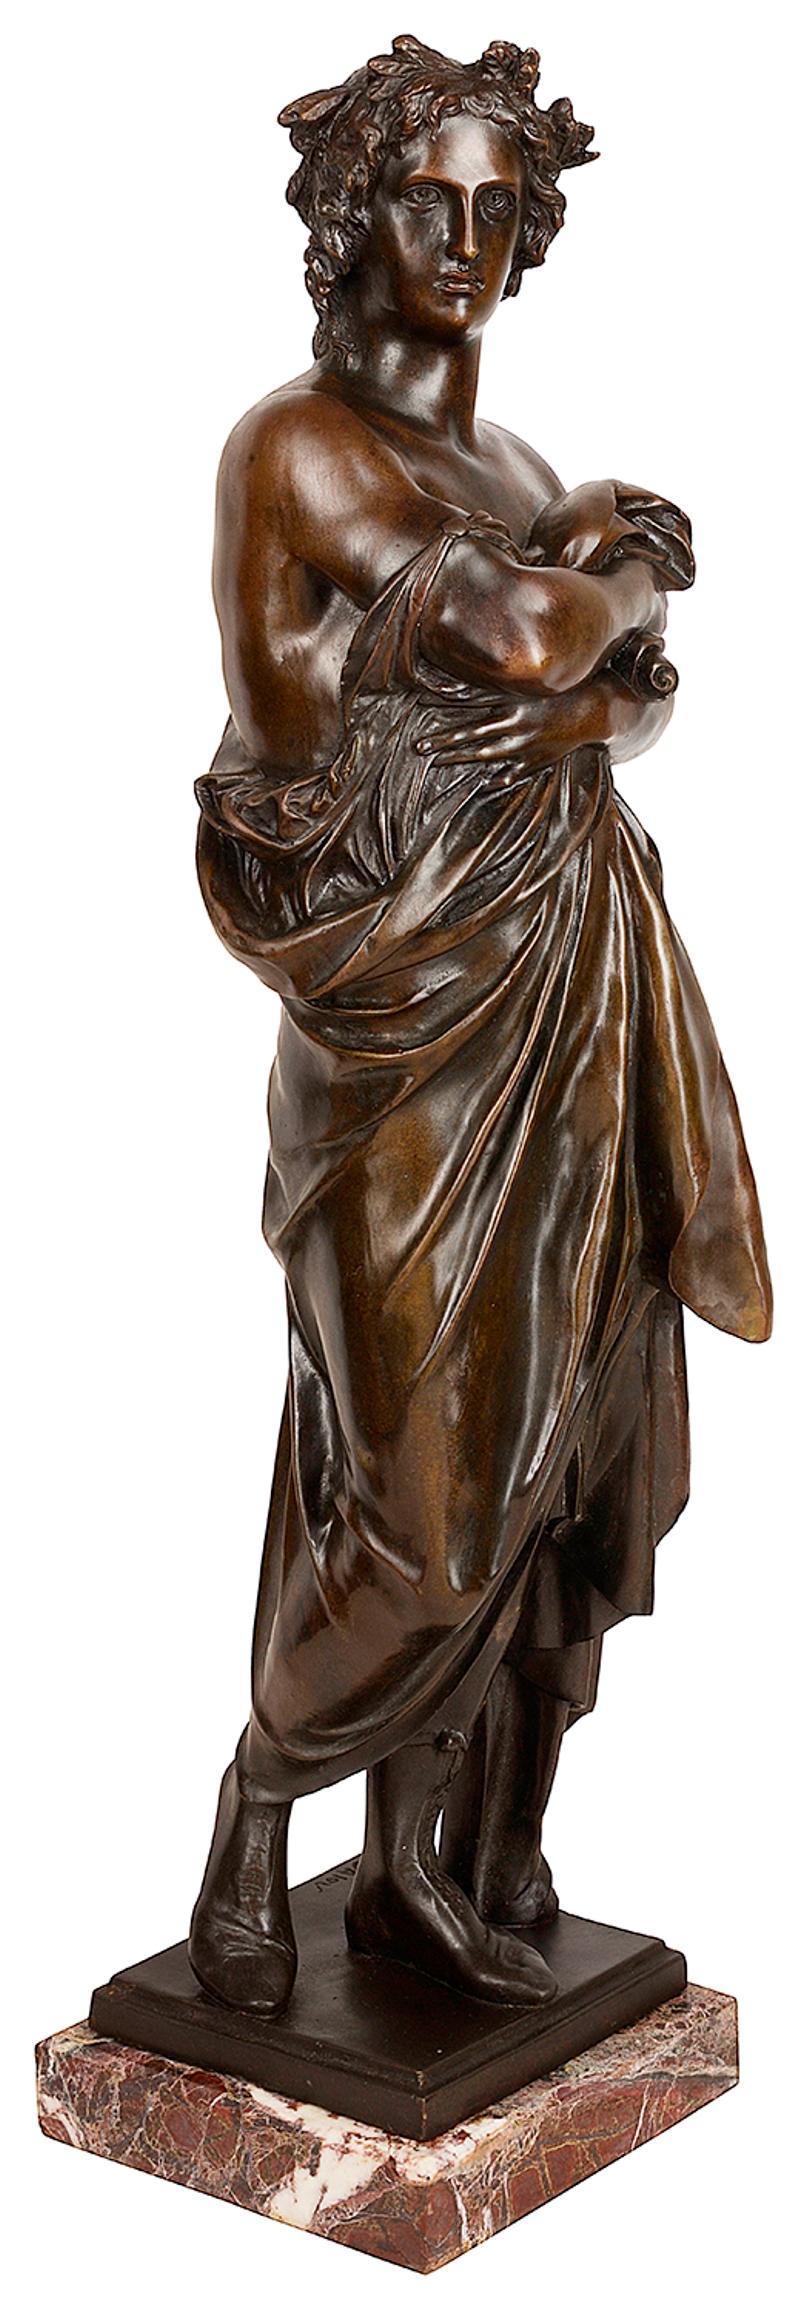 A very good quality 19th century French patinated bronze statue of a classical Roman scholar, dressed in a toga and holding a scroll. Measures: 73cm (28.5